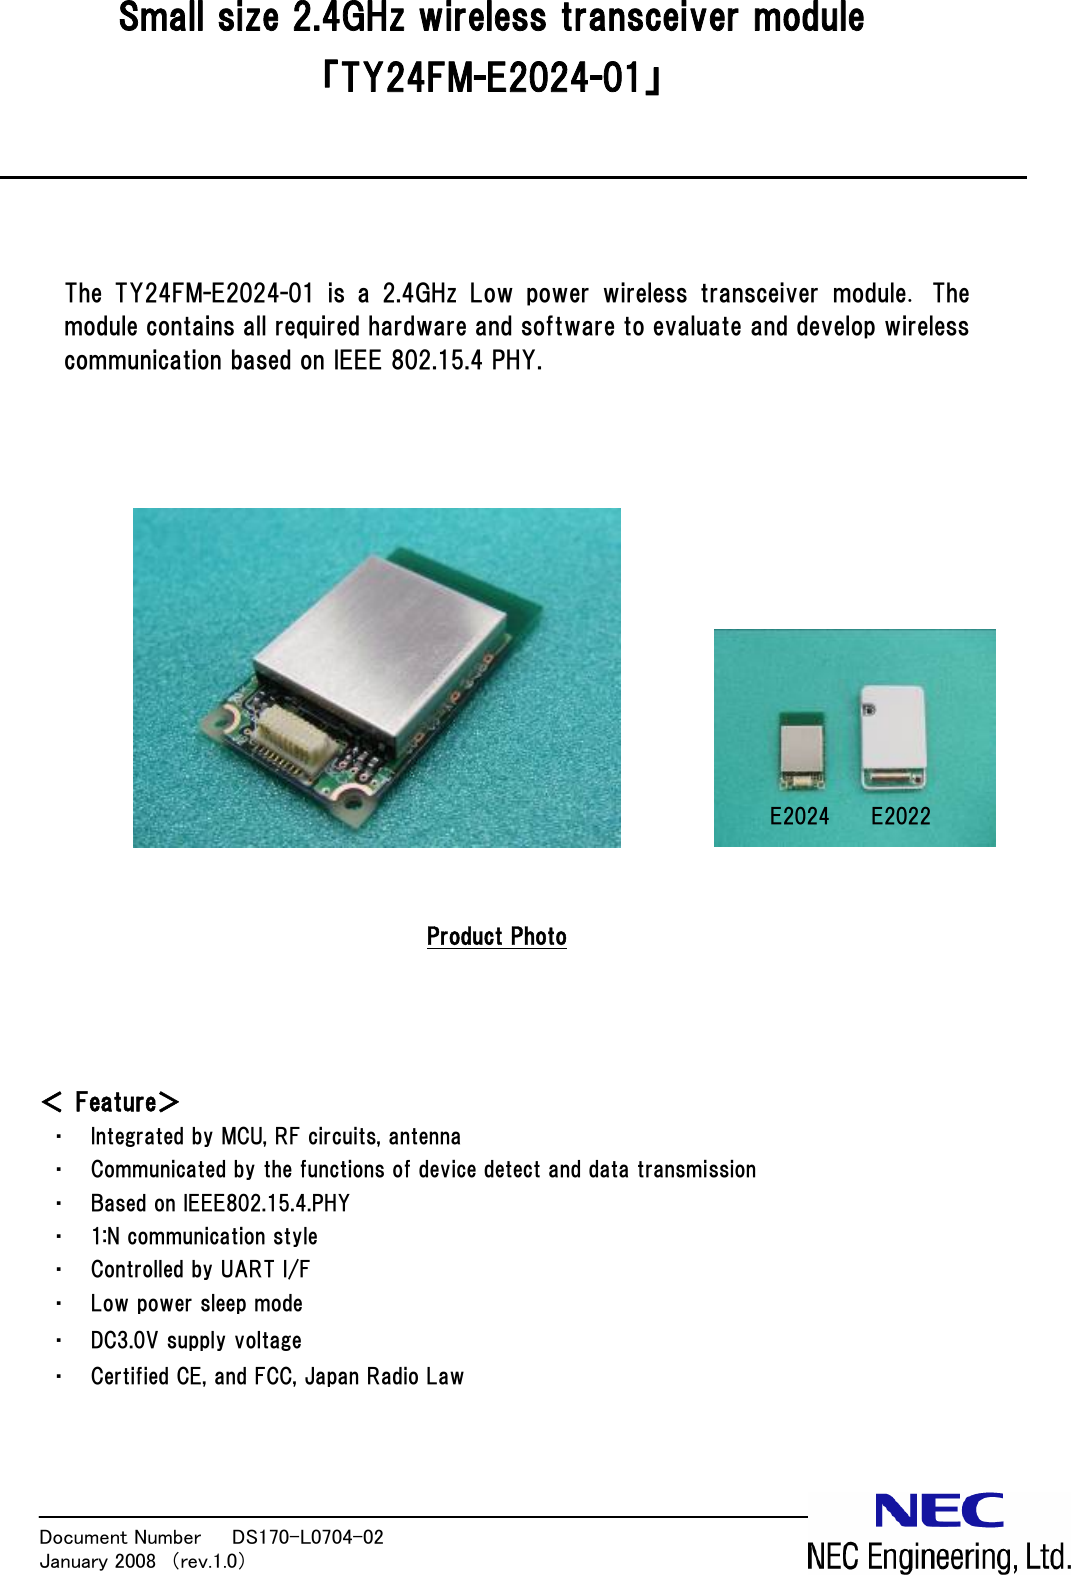 Document Number   DS170-L0704-02            January 2008  （rev.1.0）  Small size 2.4GHz wireless transceiver module 「TY24FM-E2024-01」     The  TY24FM-E2024-01  is  a  2.4GHz  Low  power  wireless  transceiver  module. The module contains all required hardware and software to evaluate and develop wireless communication based on IEEE 802.15.4 PHY.                  Product Photo     ＜ Feature＞ ・ Integrated by MCU, RF circuits, antenna ・ Communicated by the functions of device detect and data transmission ・ Based on IEEE802.15.4.PHY ・ 1:N communication style ・ Controlled by UART I/F ・ Low power sleep mode ・ DC3.0V supply voltage ・ Certified CE, and FCC, Japan Radio Law     E2022 E2024 